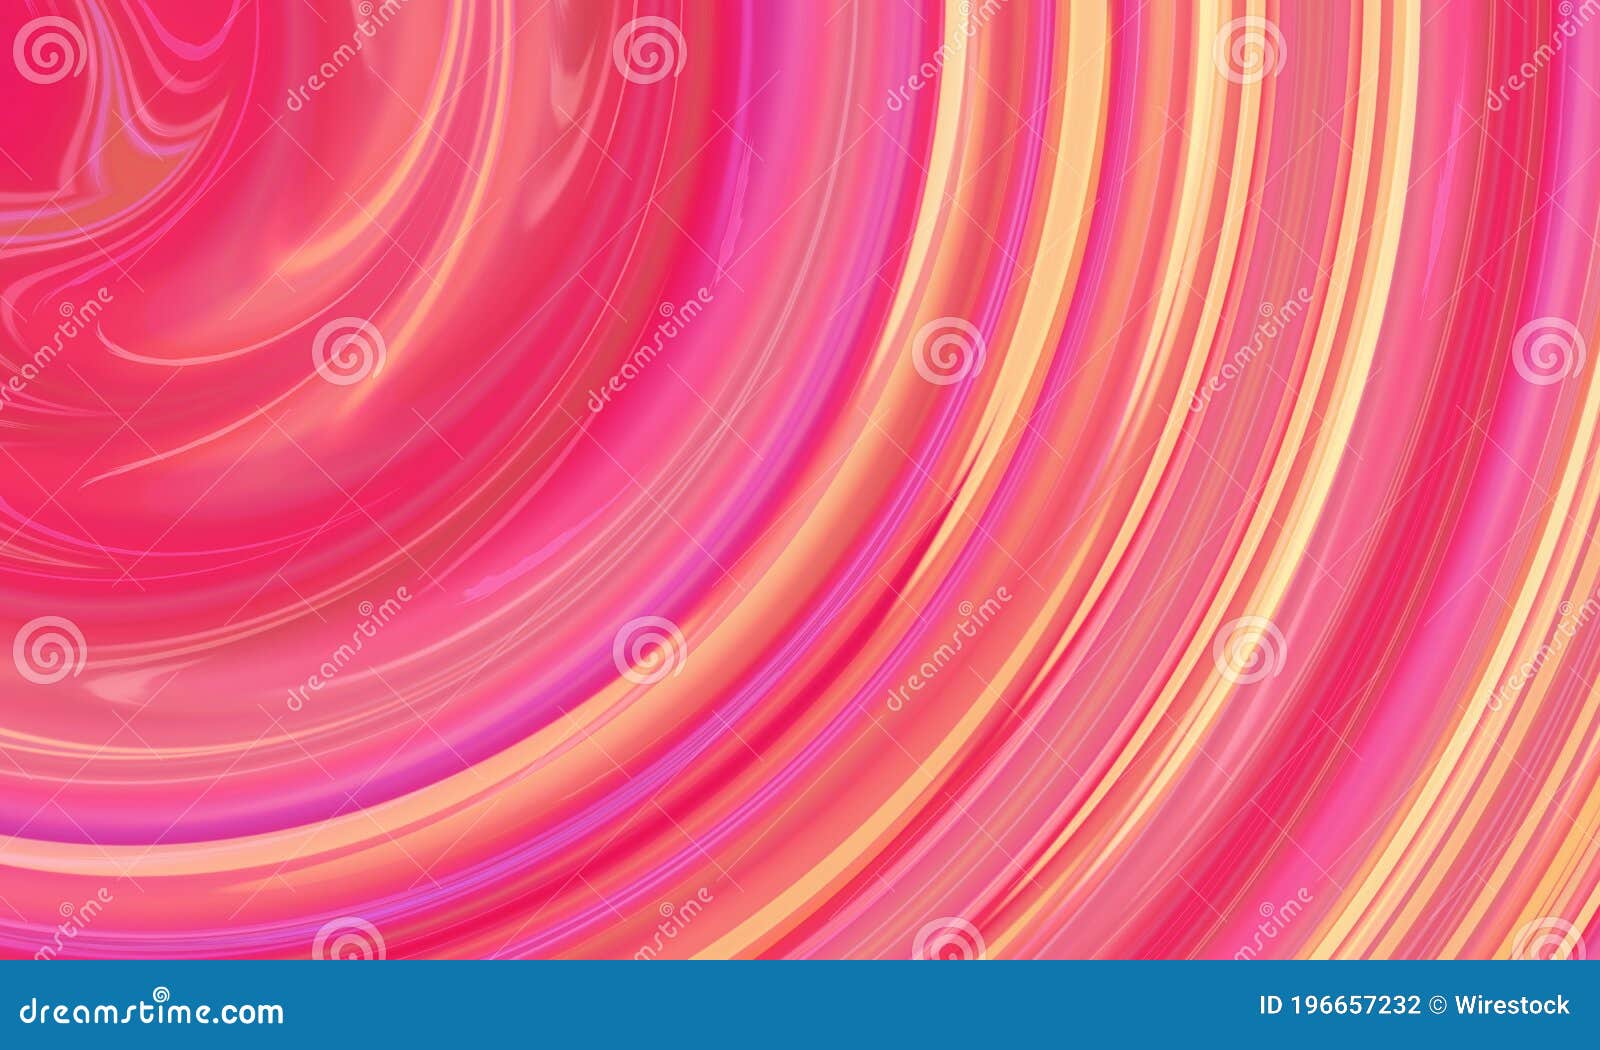 Beautiful Vibrant Illustration in Pink Color for Cool Background or  Wallpaper Stock Photo - Image of creativity, shape: 196657232